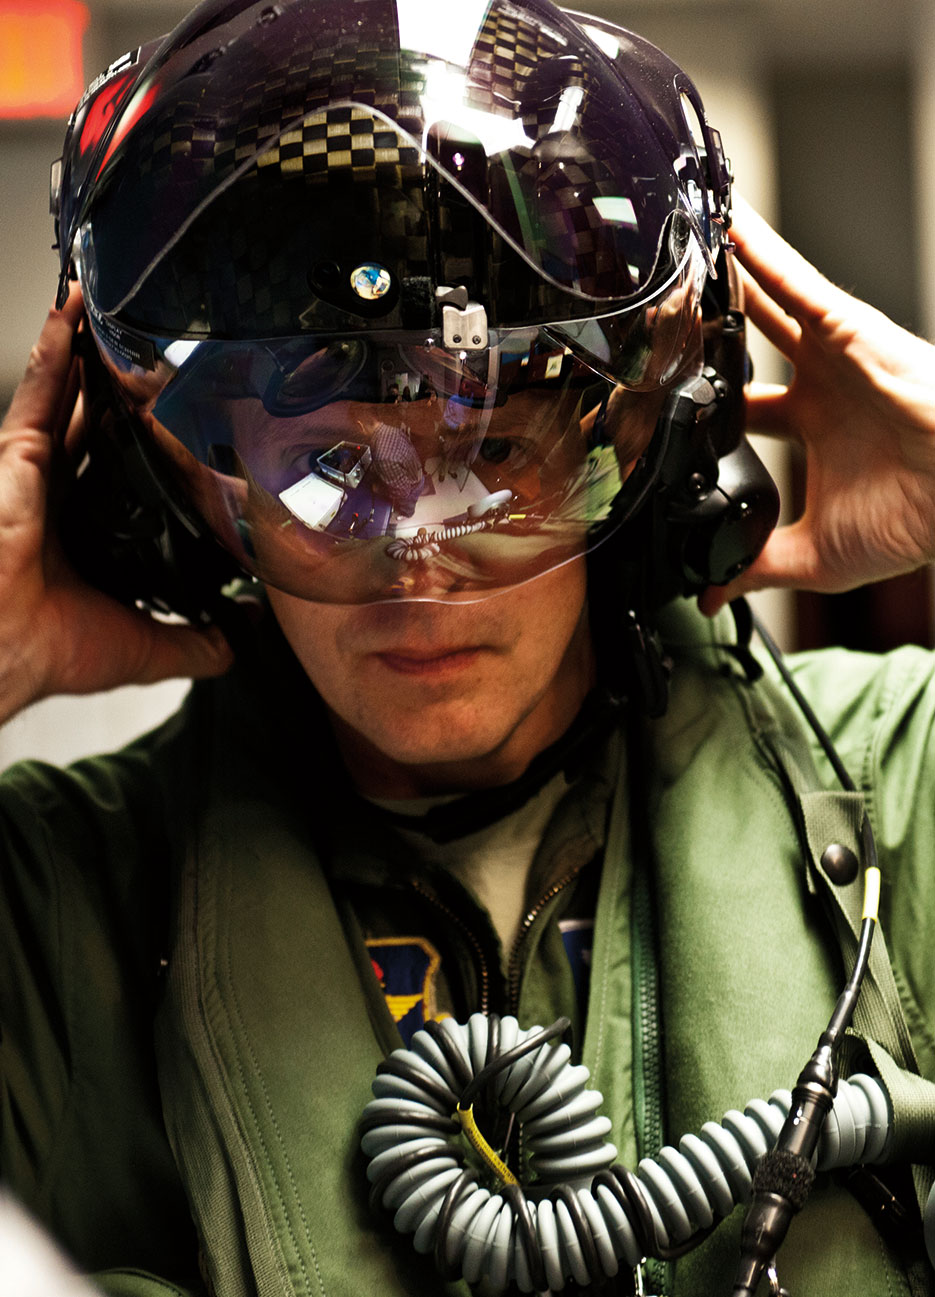 First Air Force pilot qualified to fly F-35 secures helmet prior to stepping to F-35A Lightning II joint strike fighter at Eglin Air Force Base (U.S. Air Force/Samuel King)